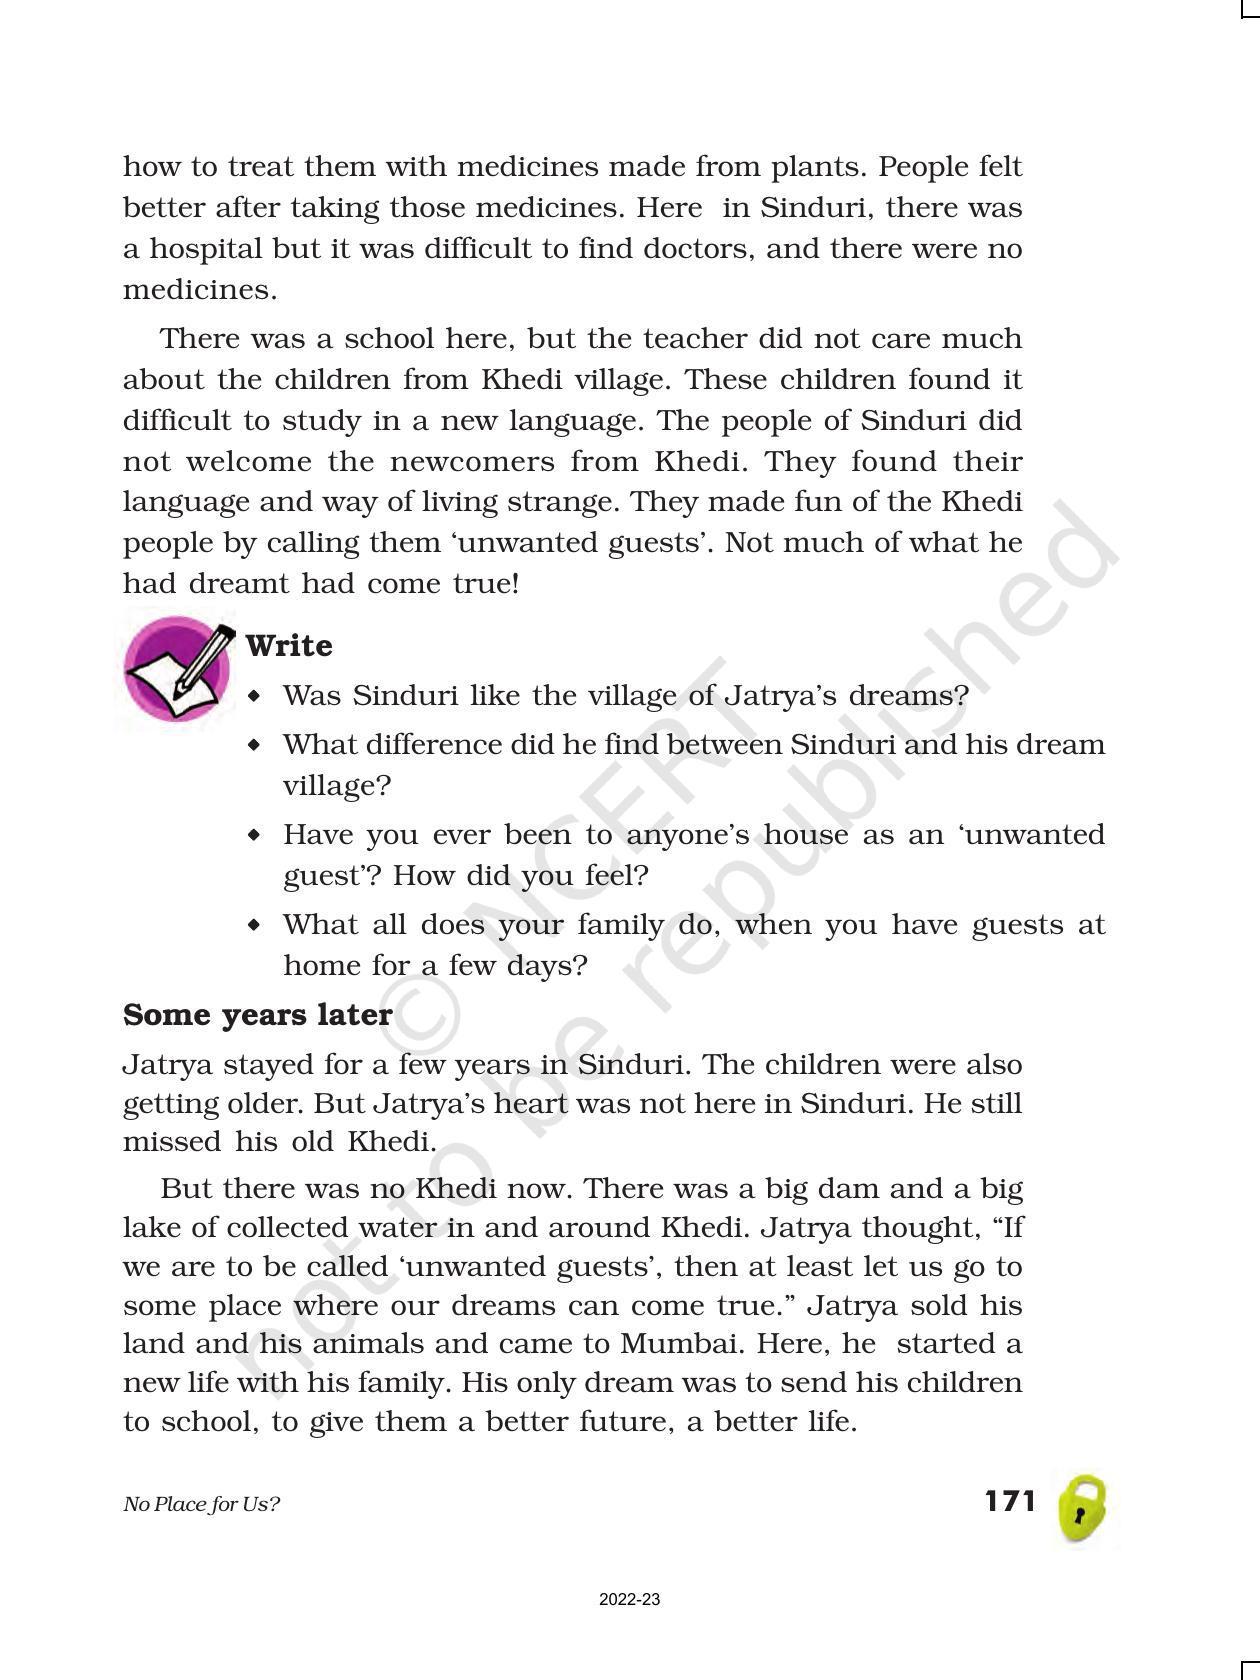 NCERT Book for Class 5 EVS Chapter 18 No Place for Us? - Page 7